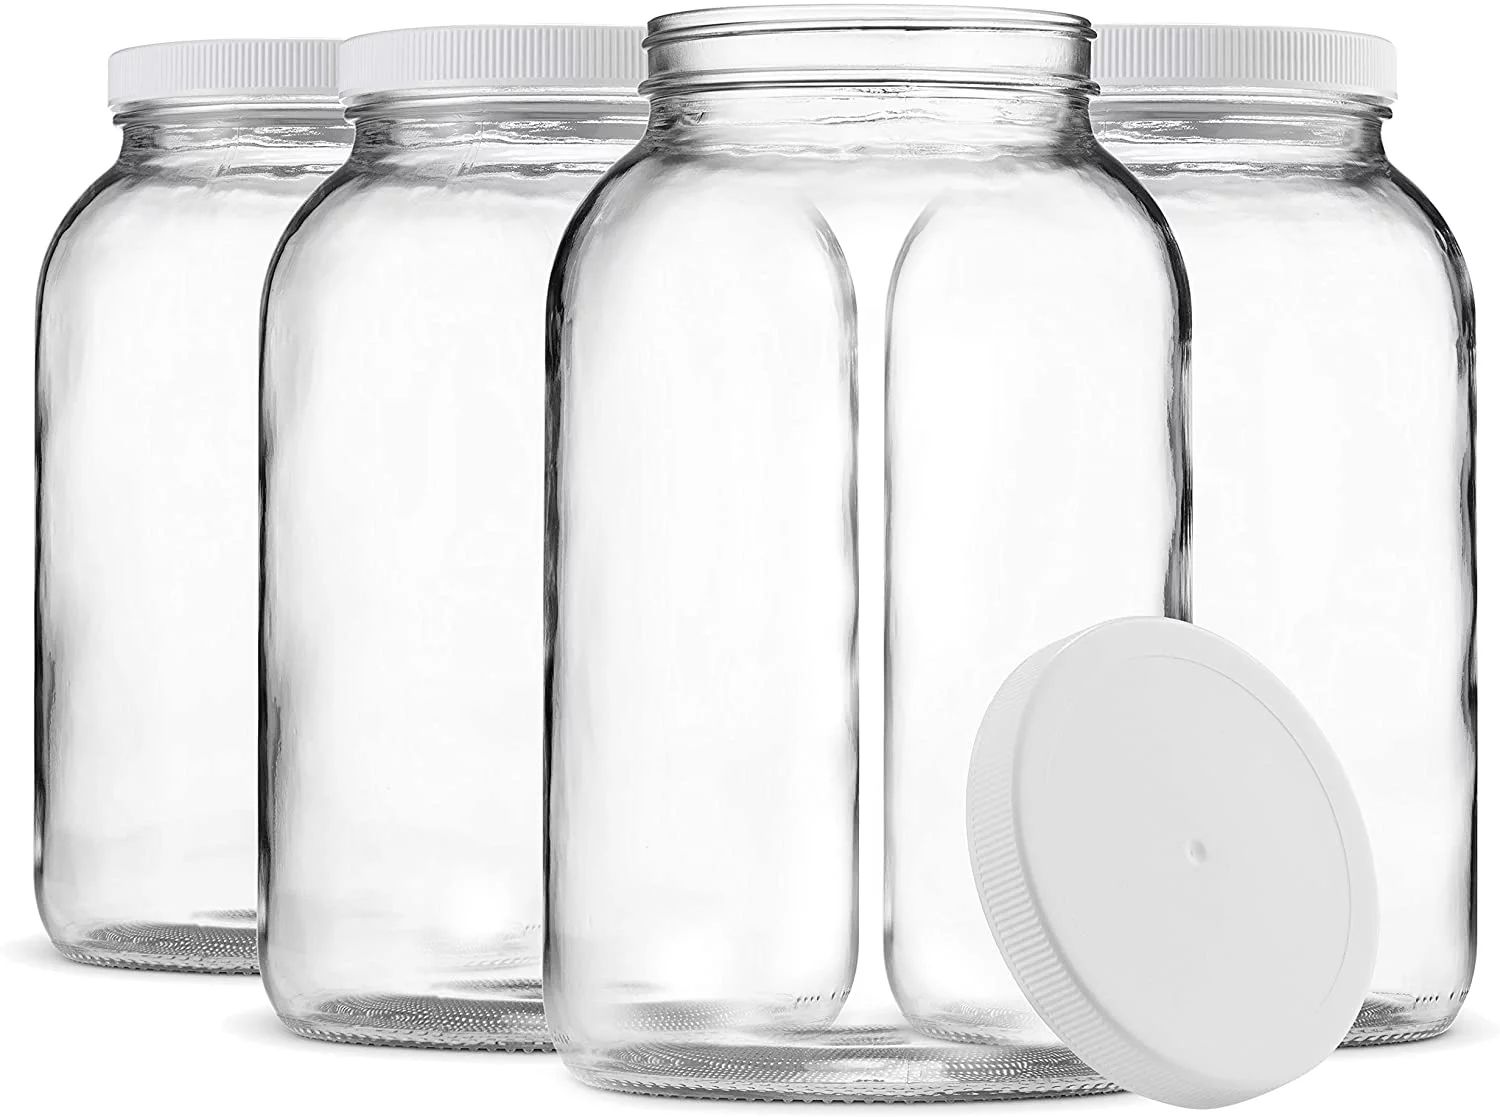 1-Gallon Glass Jar [set of 4] Wide Mouth with Airtight Plastic Lid | Walmart (US)